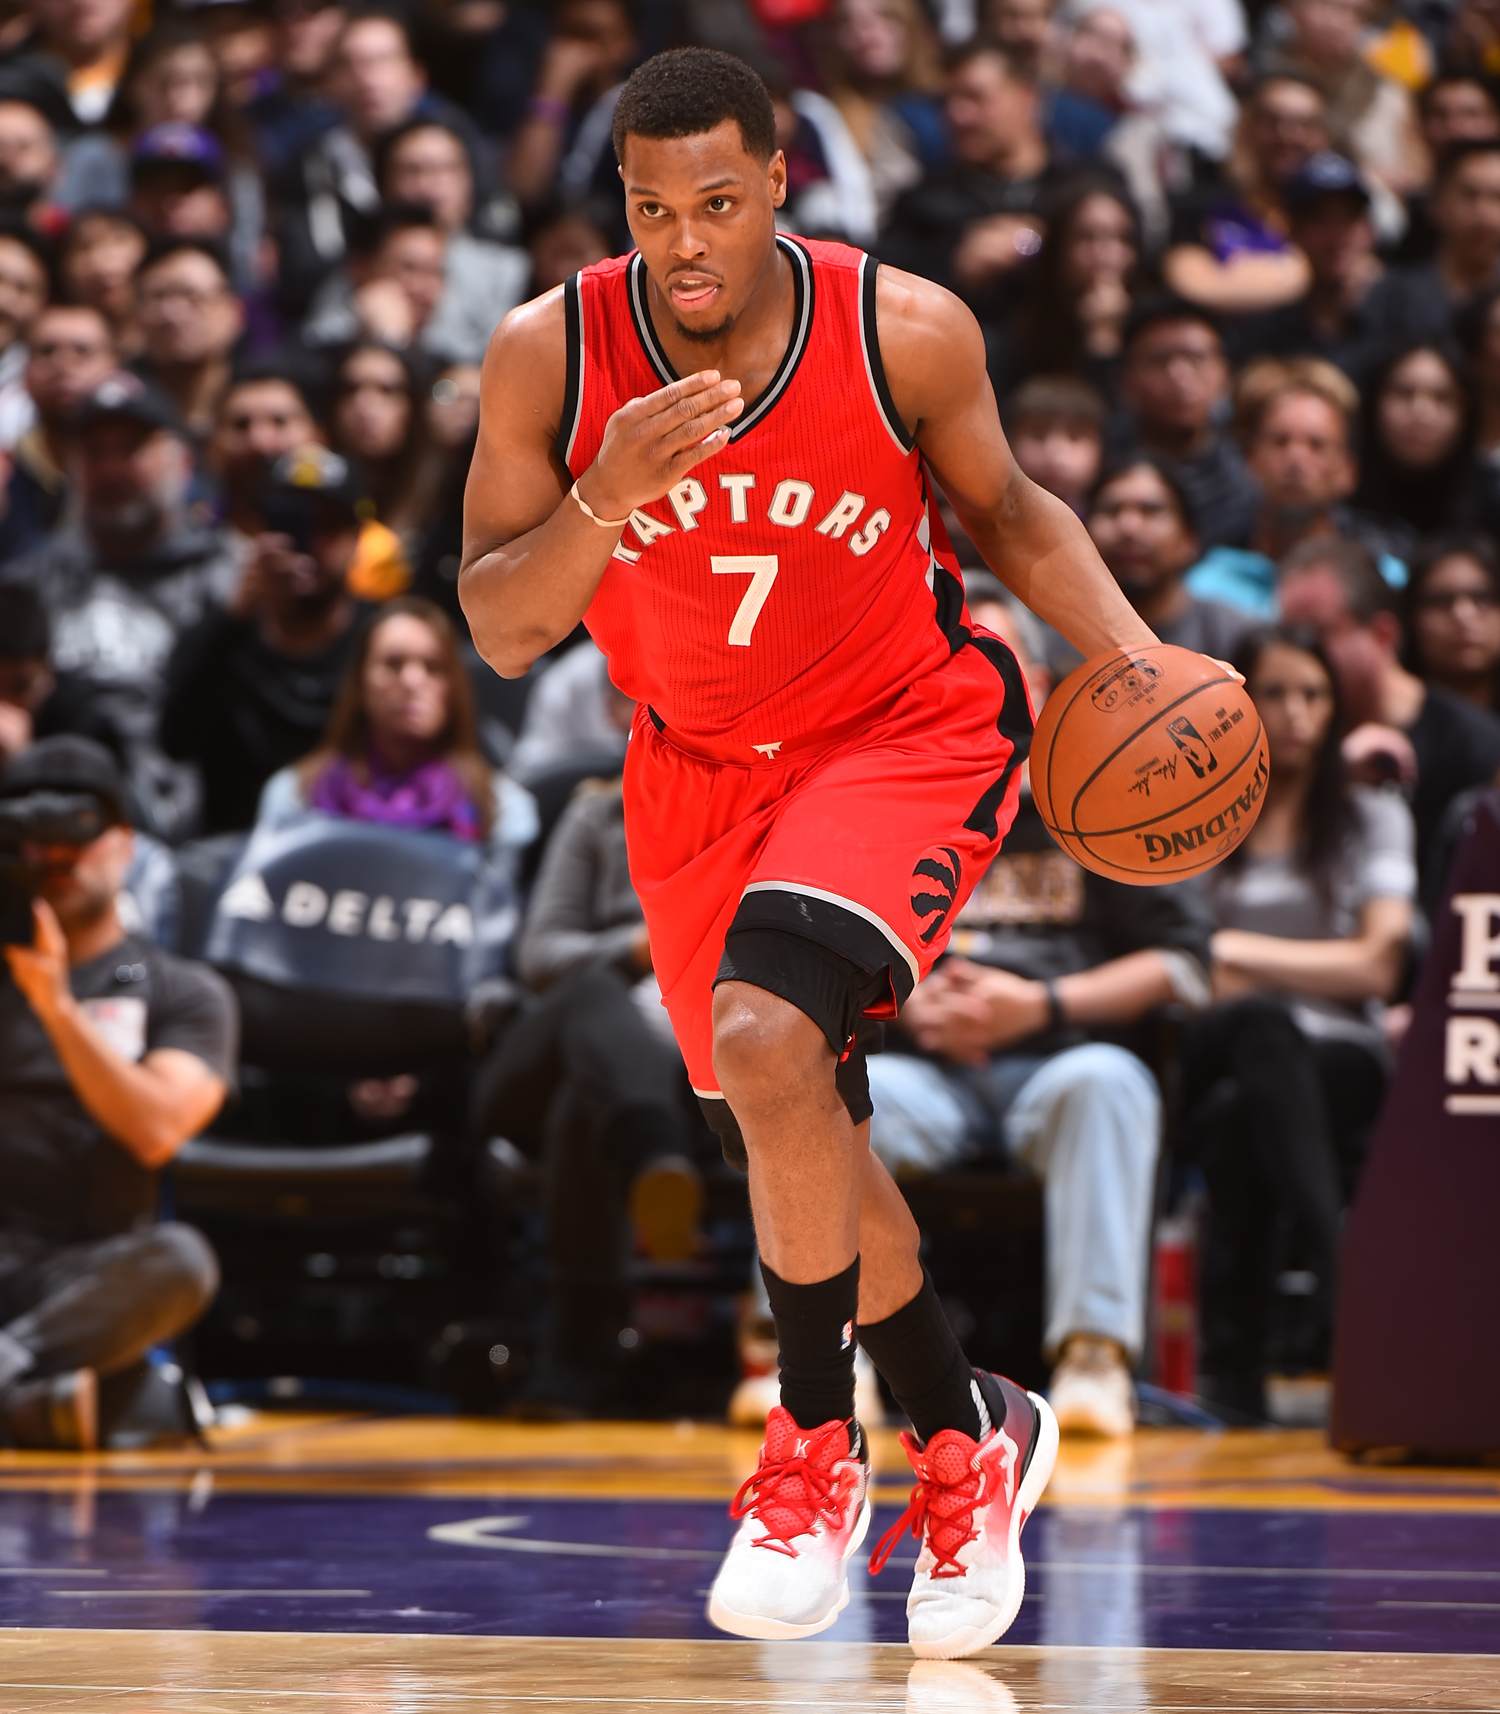 Kyle Lowry adidas Crazylight Boost low 2016